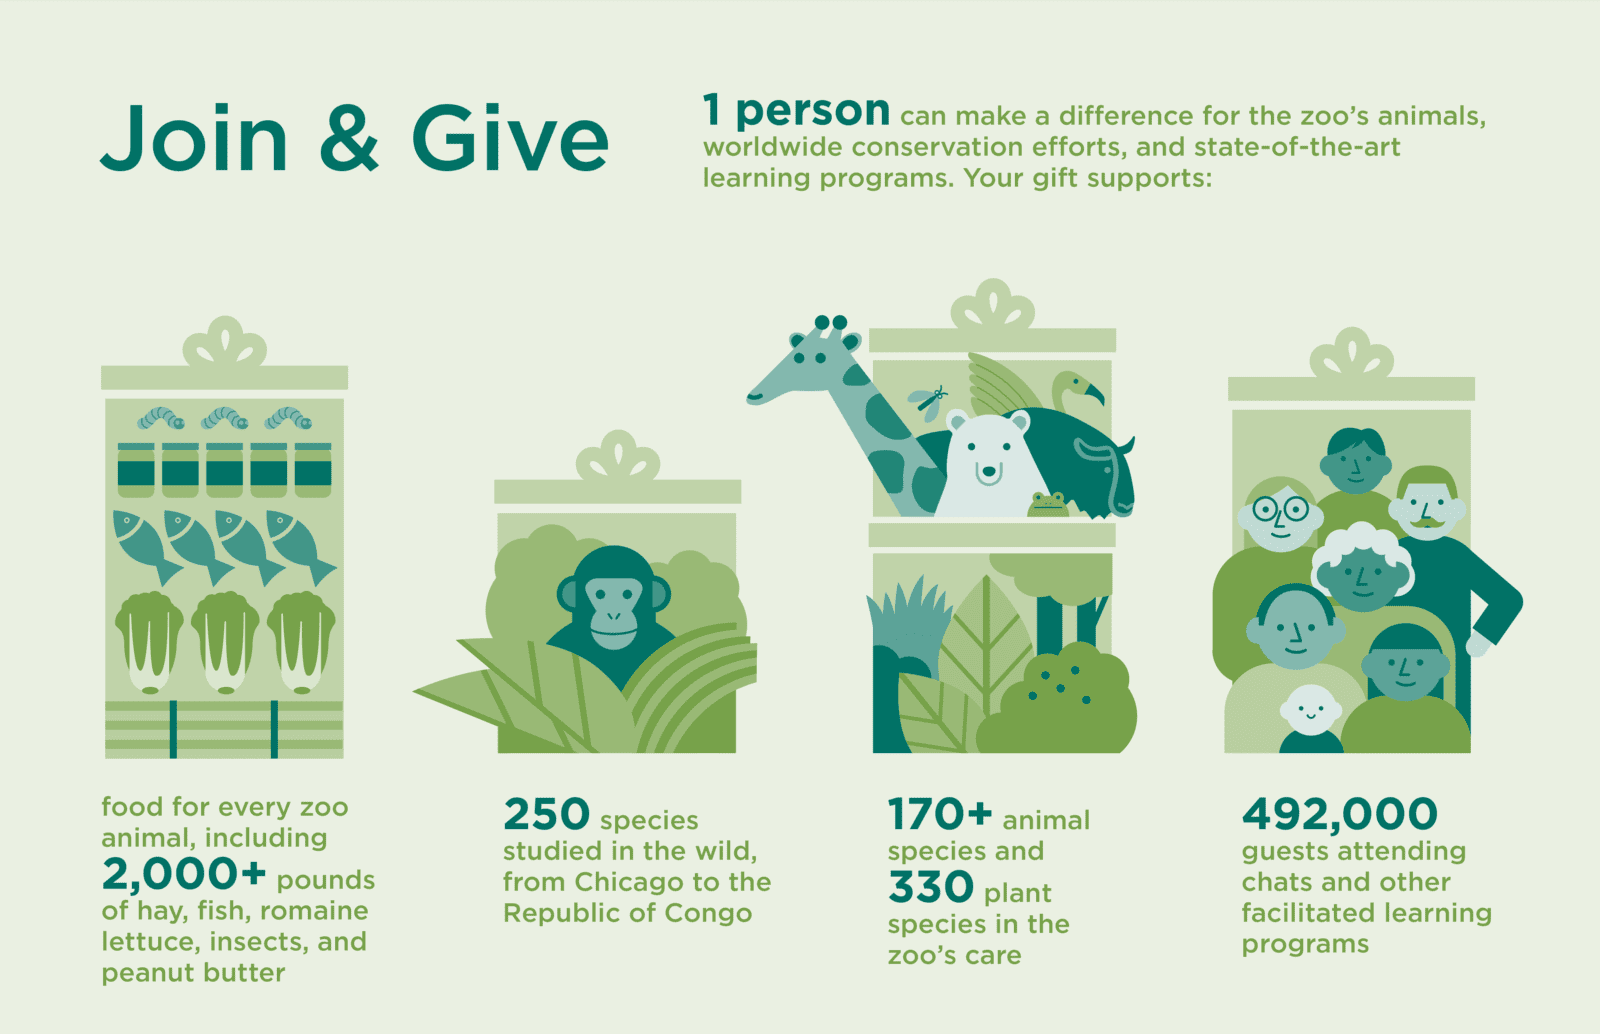 Join & Give Infographic that says: "1 person can make a difference for the zoo's animals, worldwide conservation efforts, and state-of-the-art learning programs. Your gift supports: food for every zoo animal, including 2,000+ pounds of hay, fish, romaine lettuce, insects, and peanut butter; 250 species studied in the wild, from Chicago to the Republic of Congo; 170+ animal species and 330 plant species in the zoo's care; 492,000 guests attending chats and other facilitated learning programs.